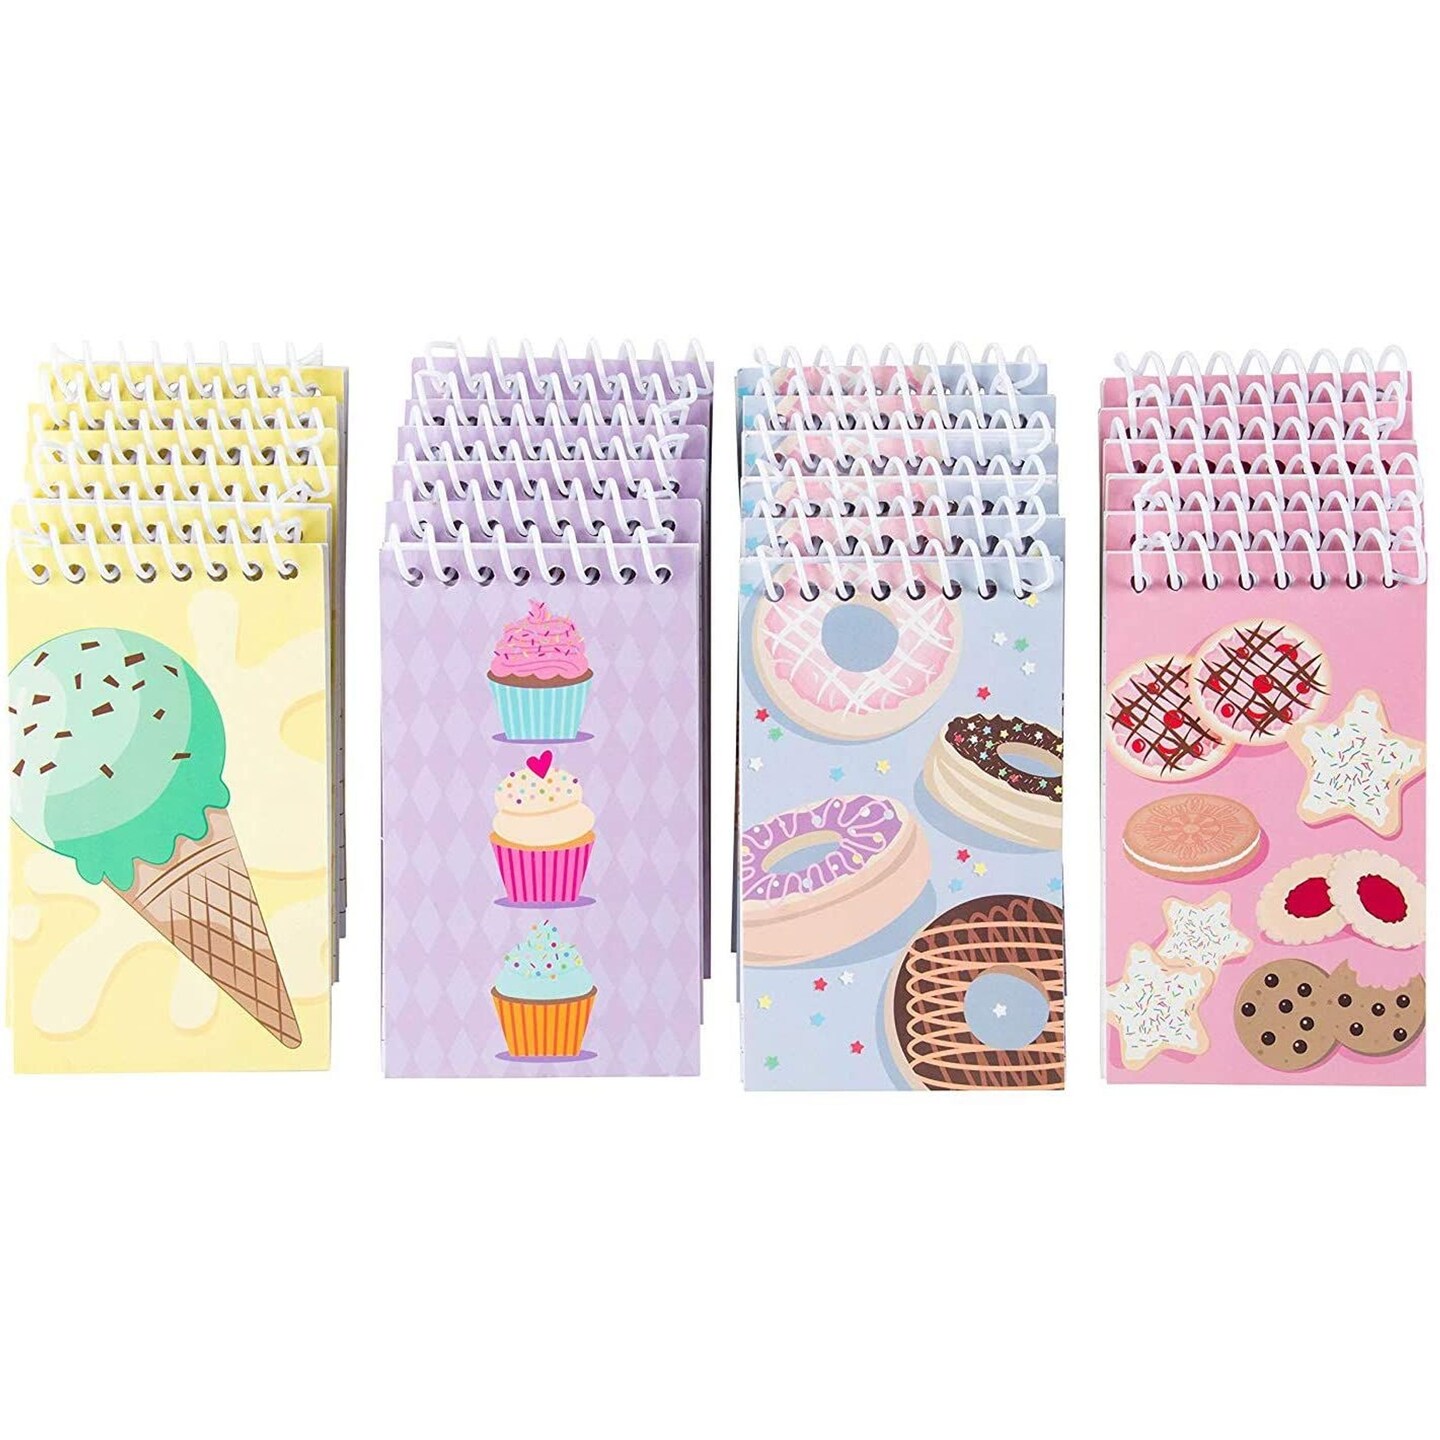 24 Pack Spiral Notepads 3x5 inches - Baking Party Favors for Kids - Mini Notebooks with Donut Cupcake Ice Cream Designs